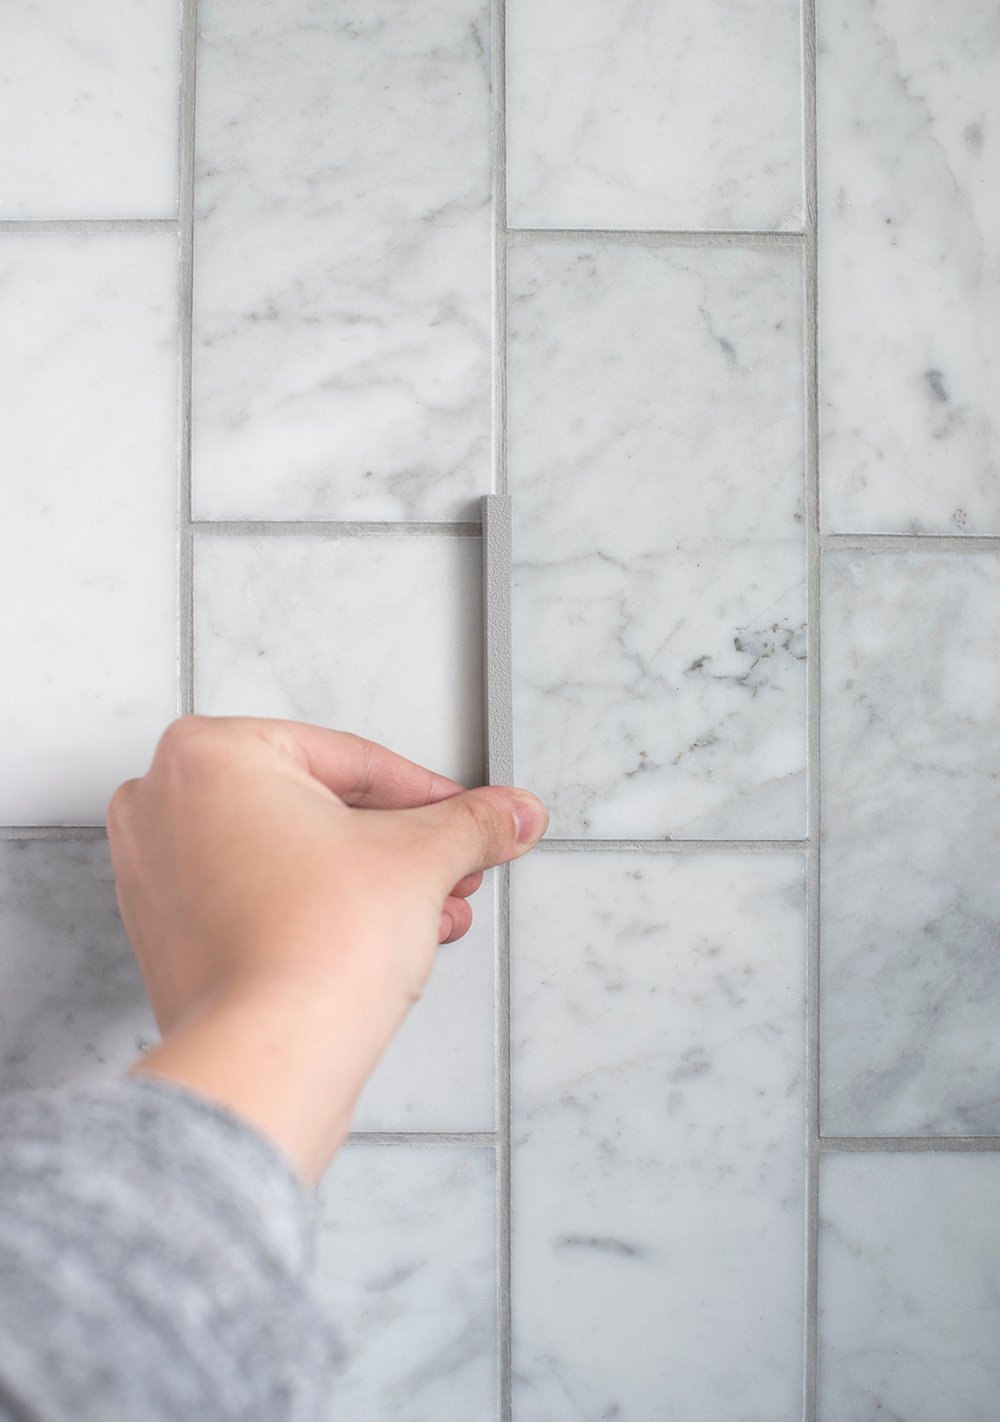 The Best Mapei Grout Colors (Designer Tile Pairings & Advice) - roomfortuesday.com